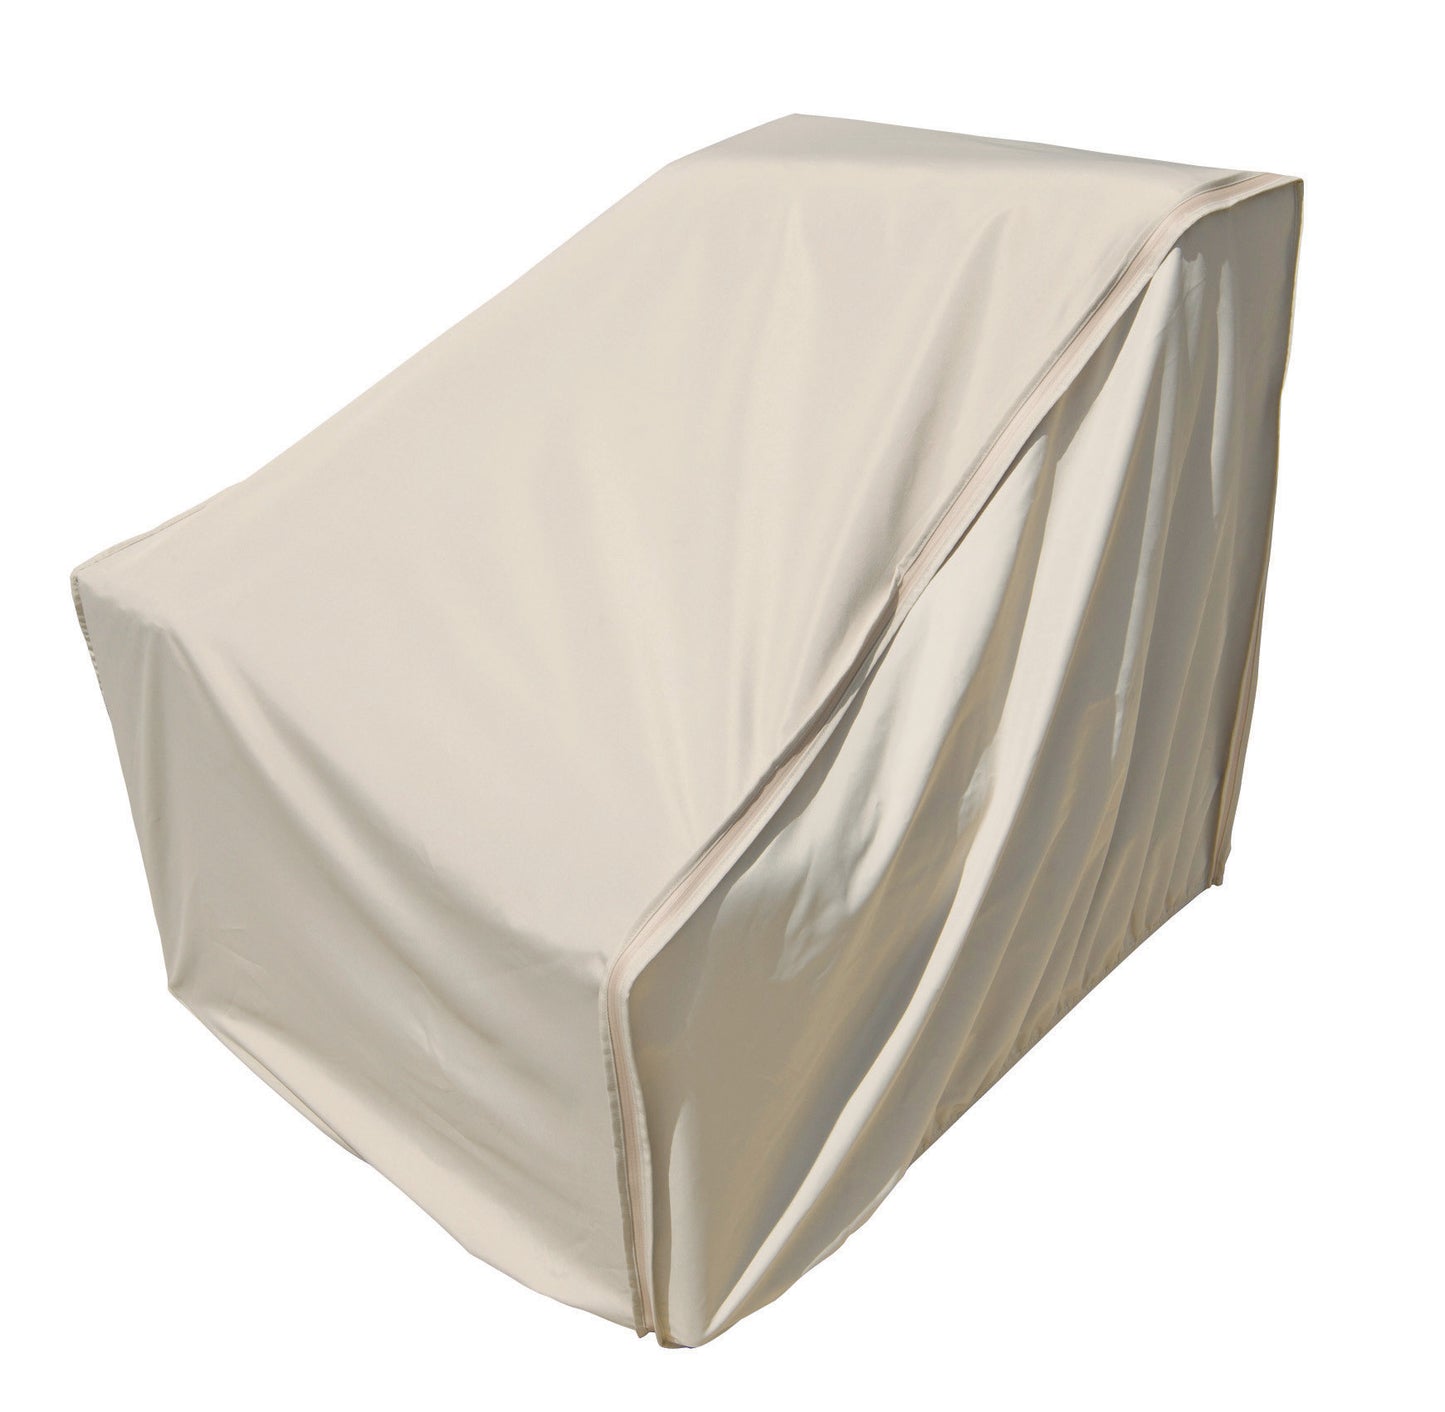 Treasure Garden CP403 Sectional Cover - Left Arm End Unit | Barbecues Galore Burlington, Oakville, Toronto and Calgary, Alberta. Stop by for all of your patio, cover, BBQ and accessory needs